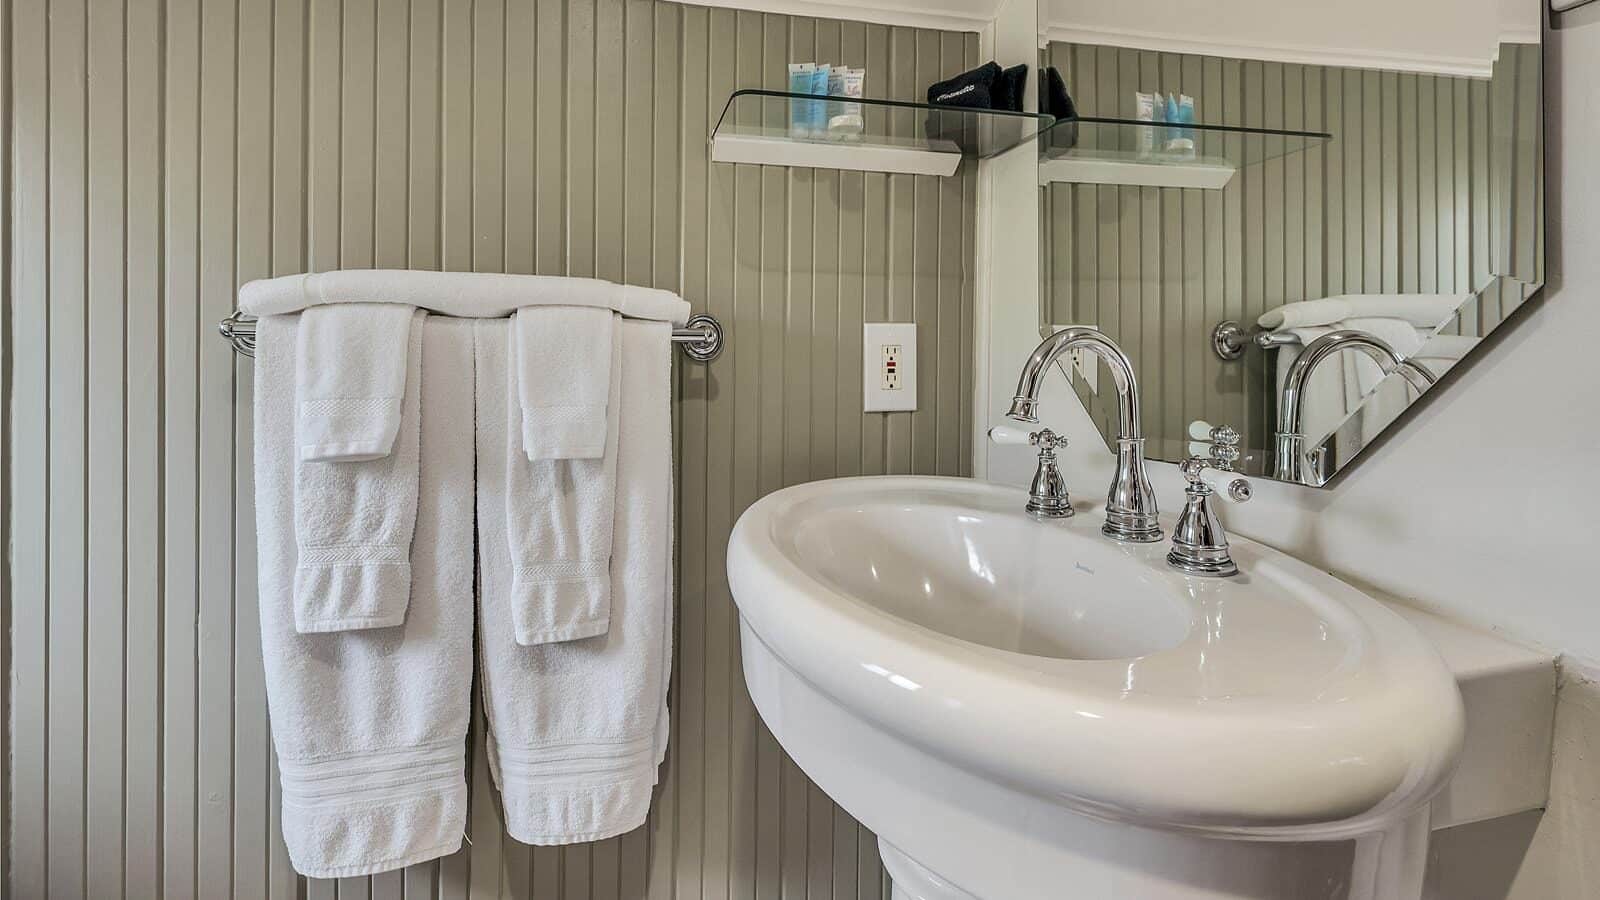 Close up view of white sink and towel bar with white towels